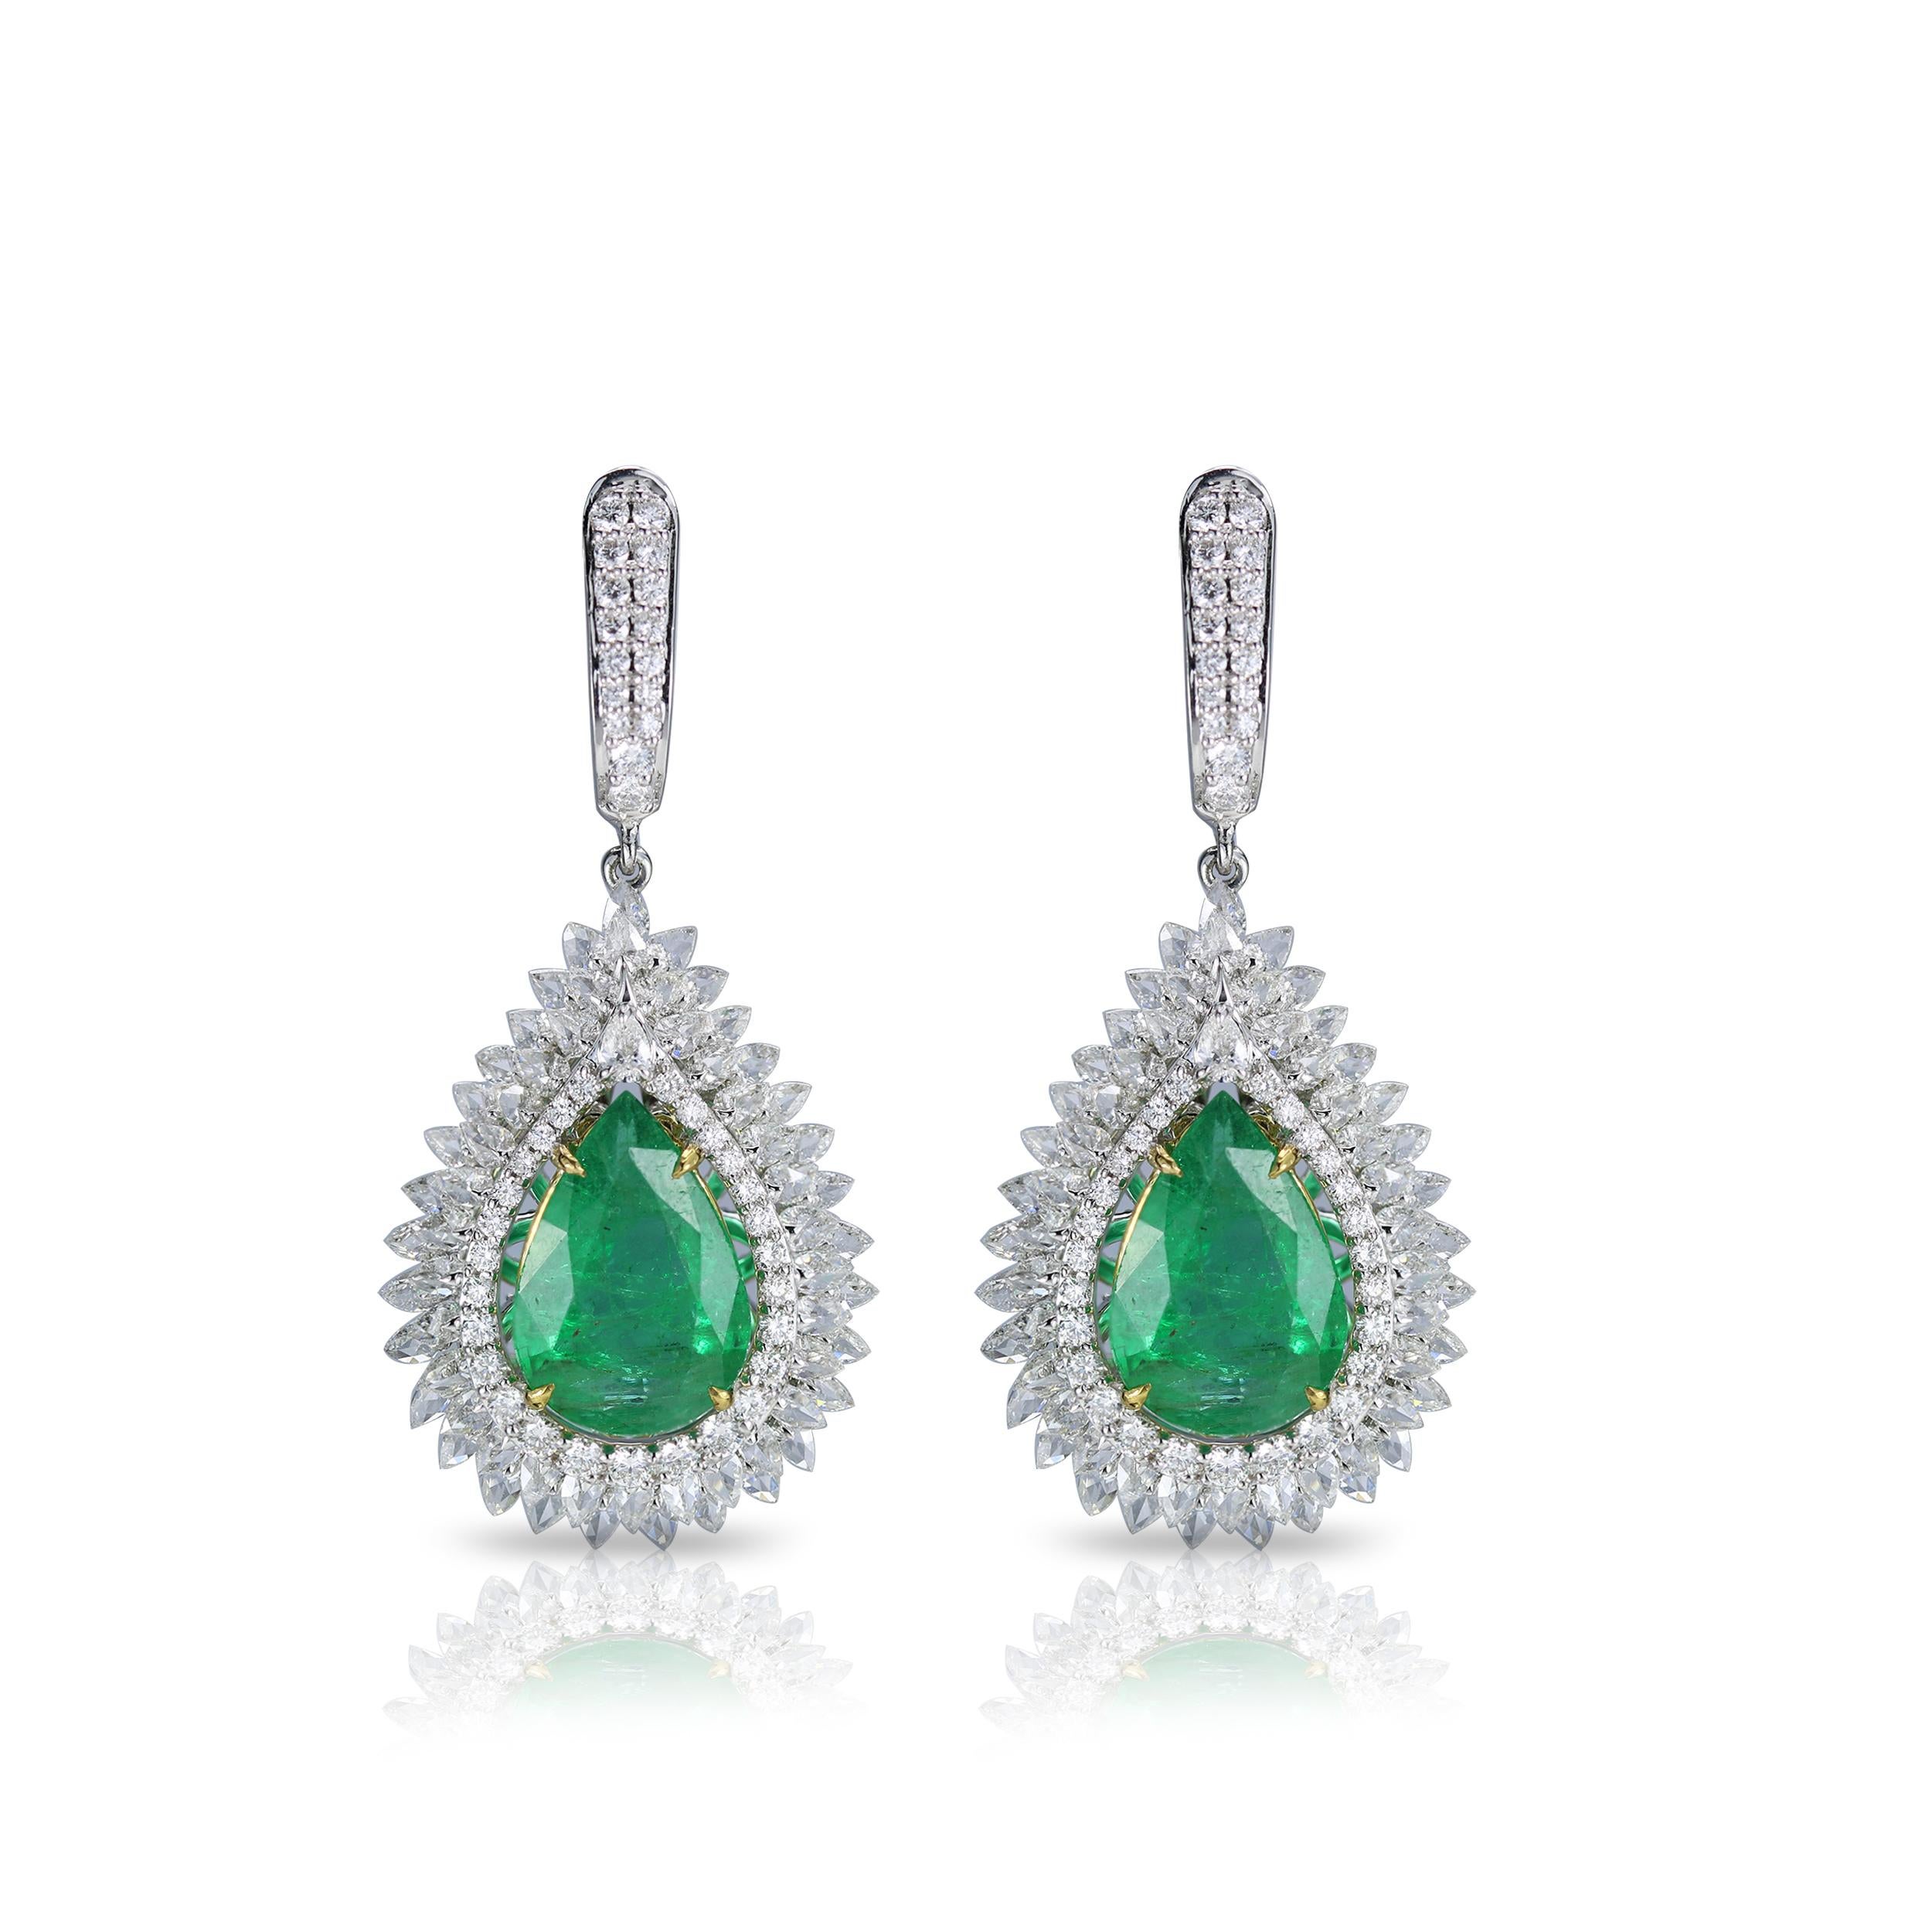 Diamond and emerald earrings

Strong style statements are carefully curated, and with this pair of 18K white gold earrings featuring pear and round rosecut and round brilliant cut diamonds and emeralds set in a prong and drill setting you can